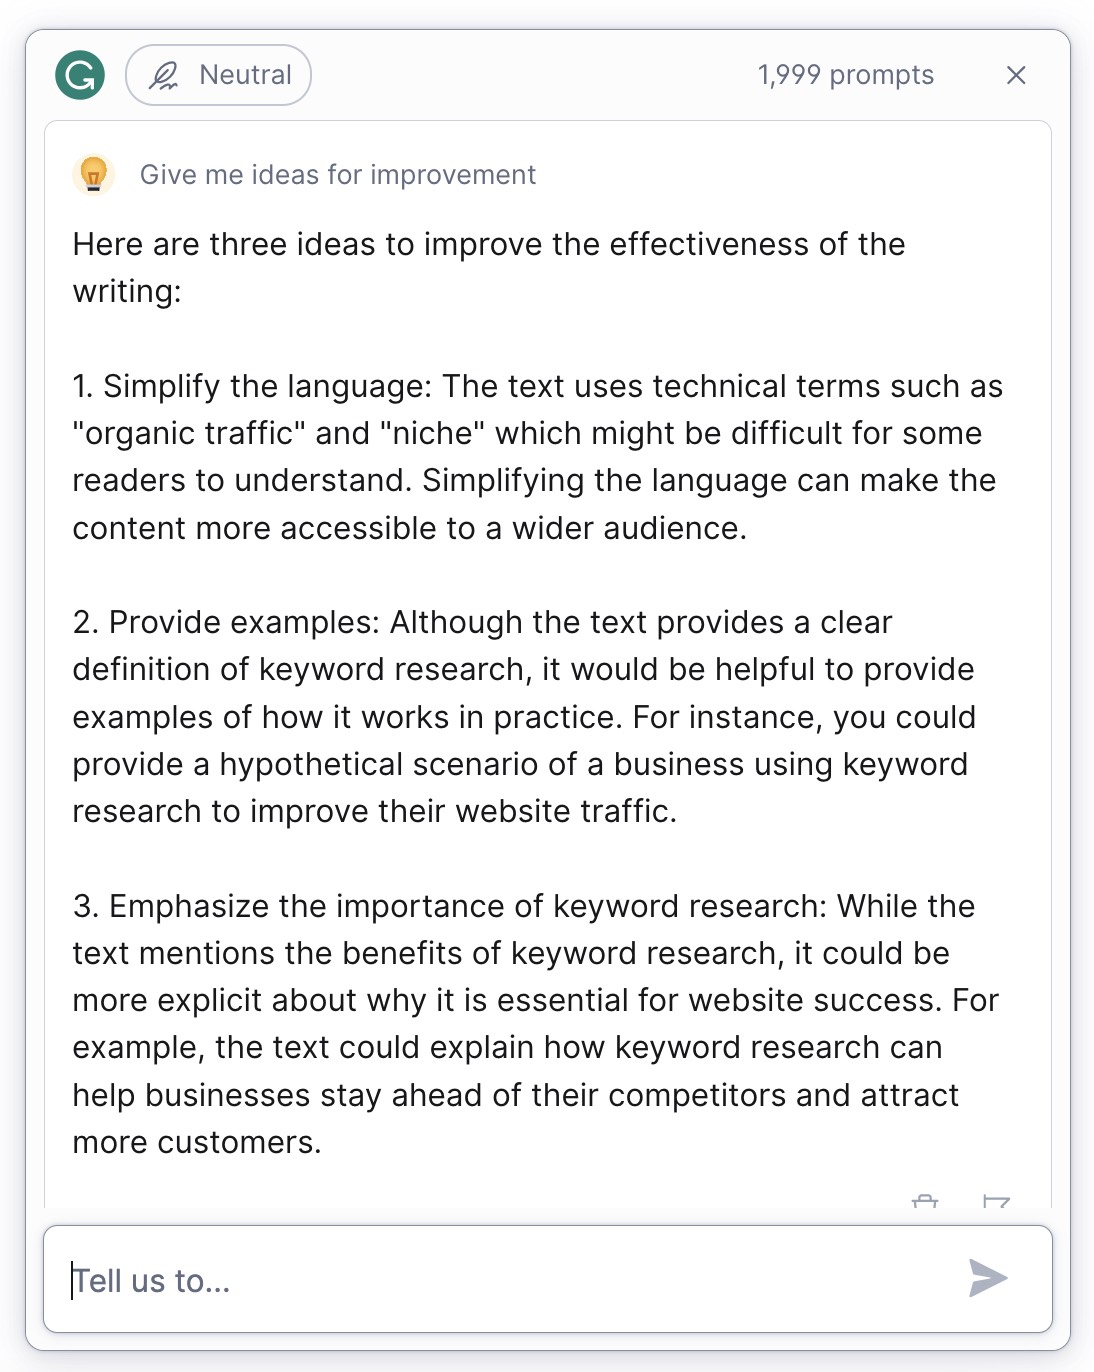 GrammarlyGO ideas to improve the effectiveness of the writing